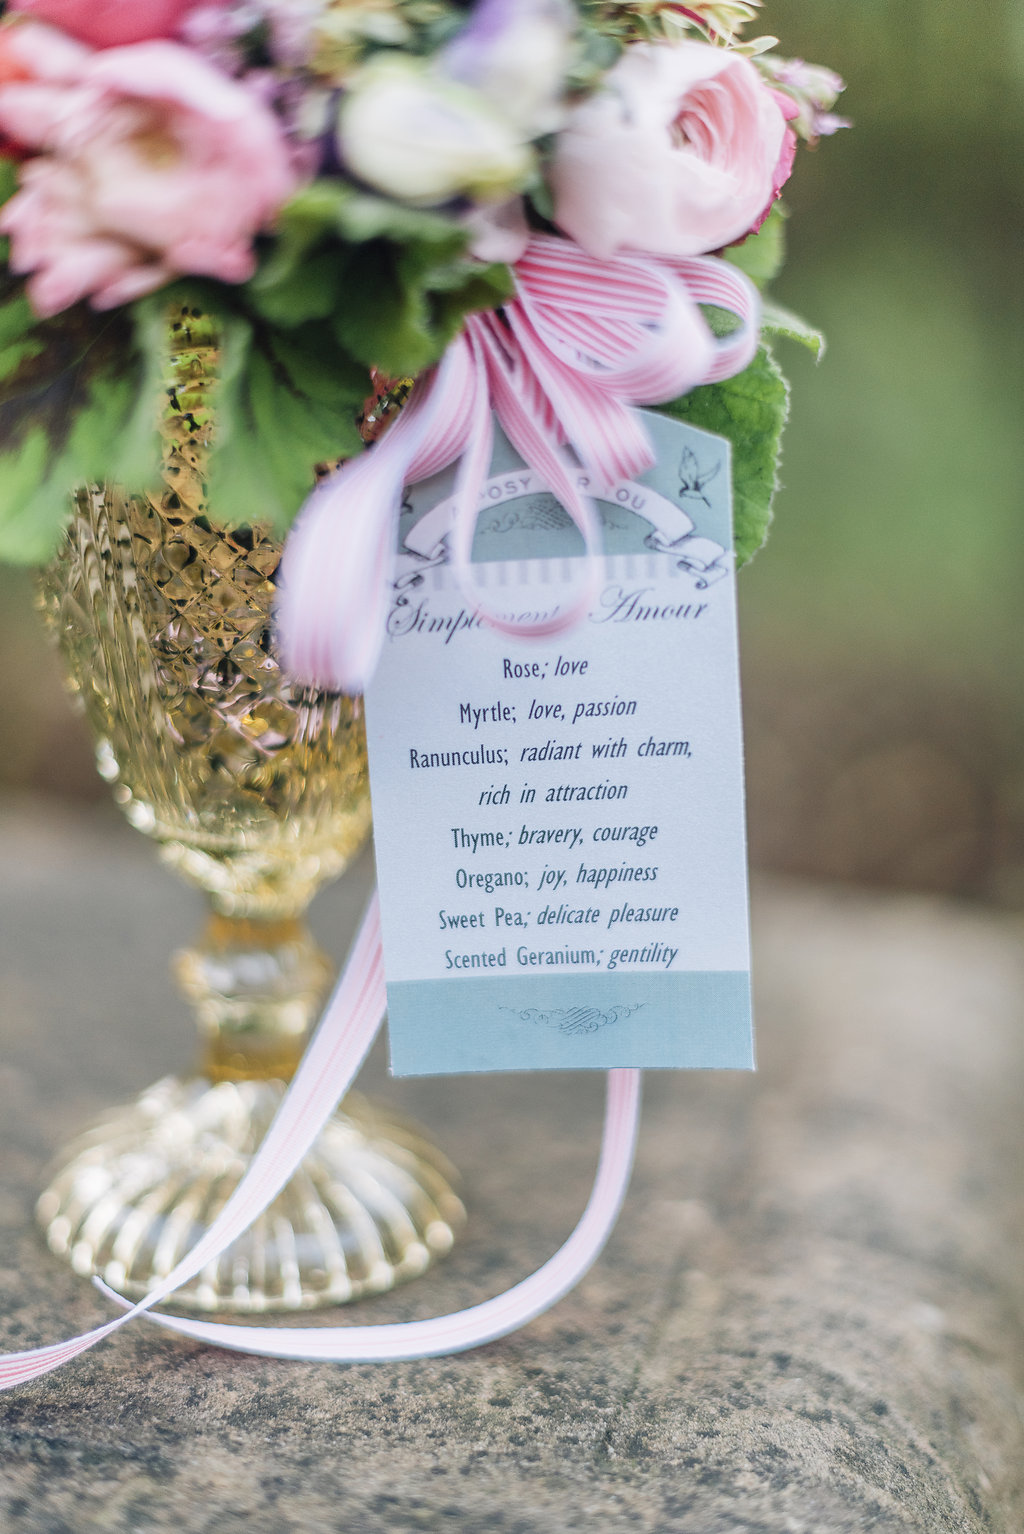 A Valentine's Day Posy and the Language of Flowers